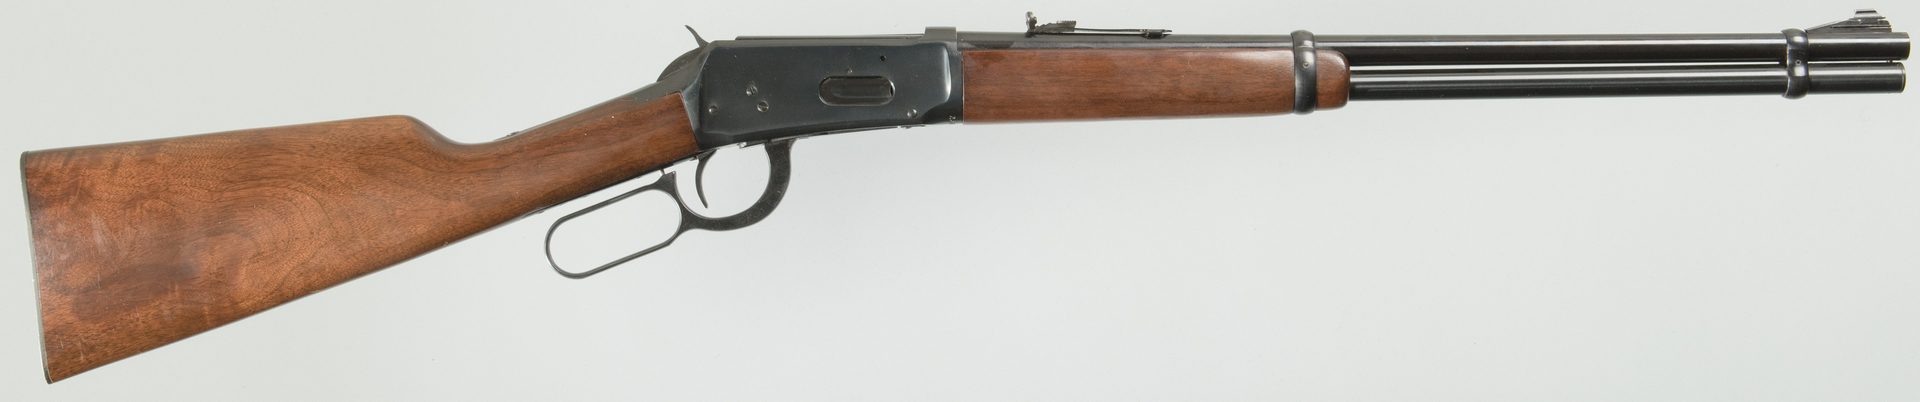 Lot 820: Winchester Model 94, 30-30 Win Lever Action Rifle